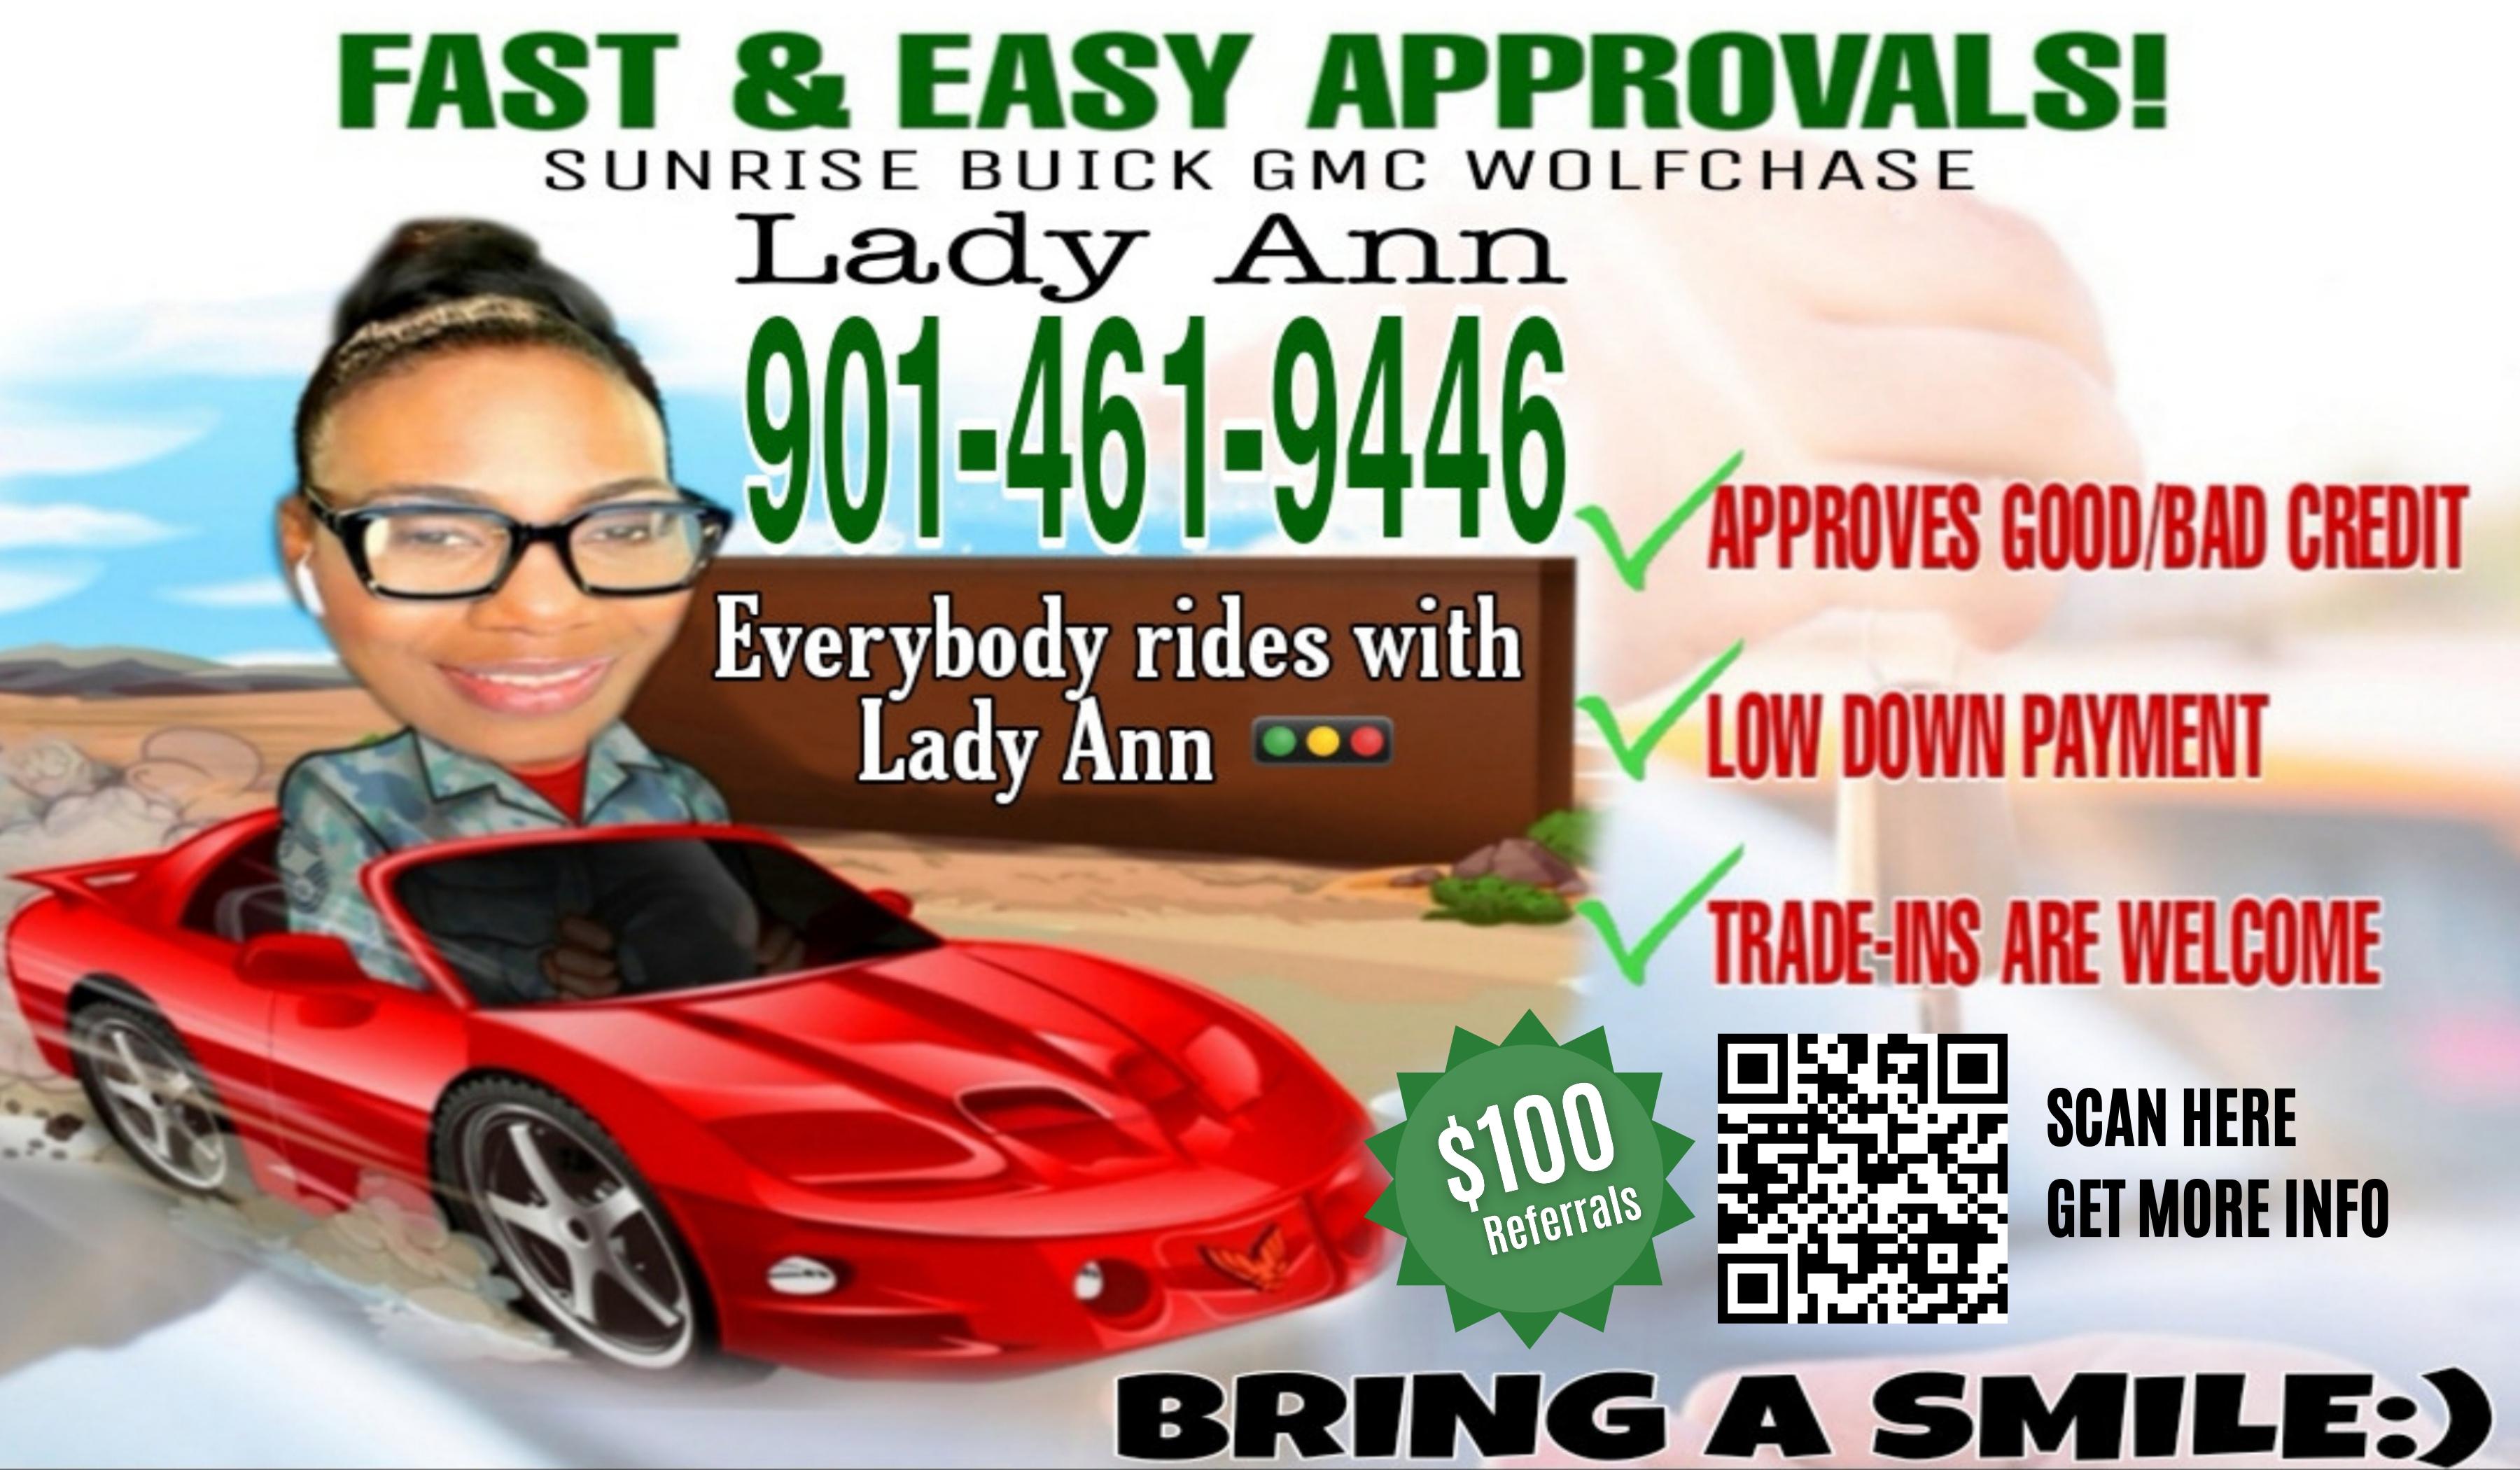 Fast & Easy approvals